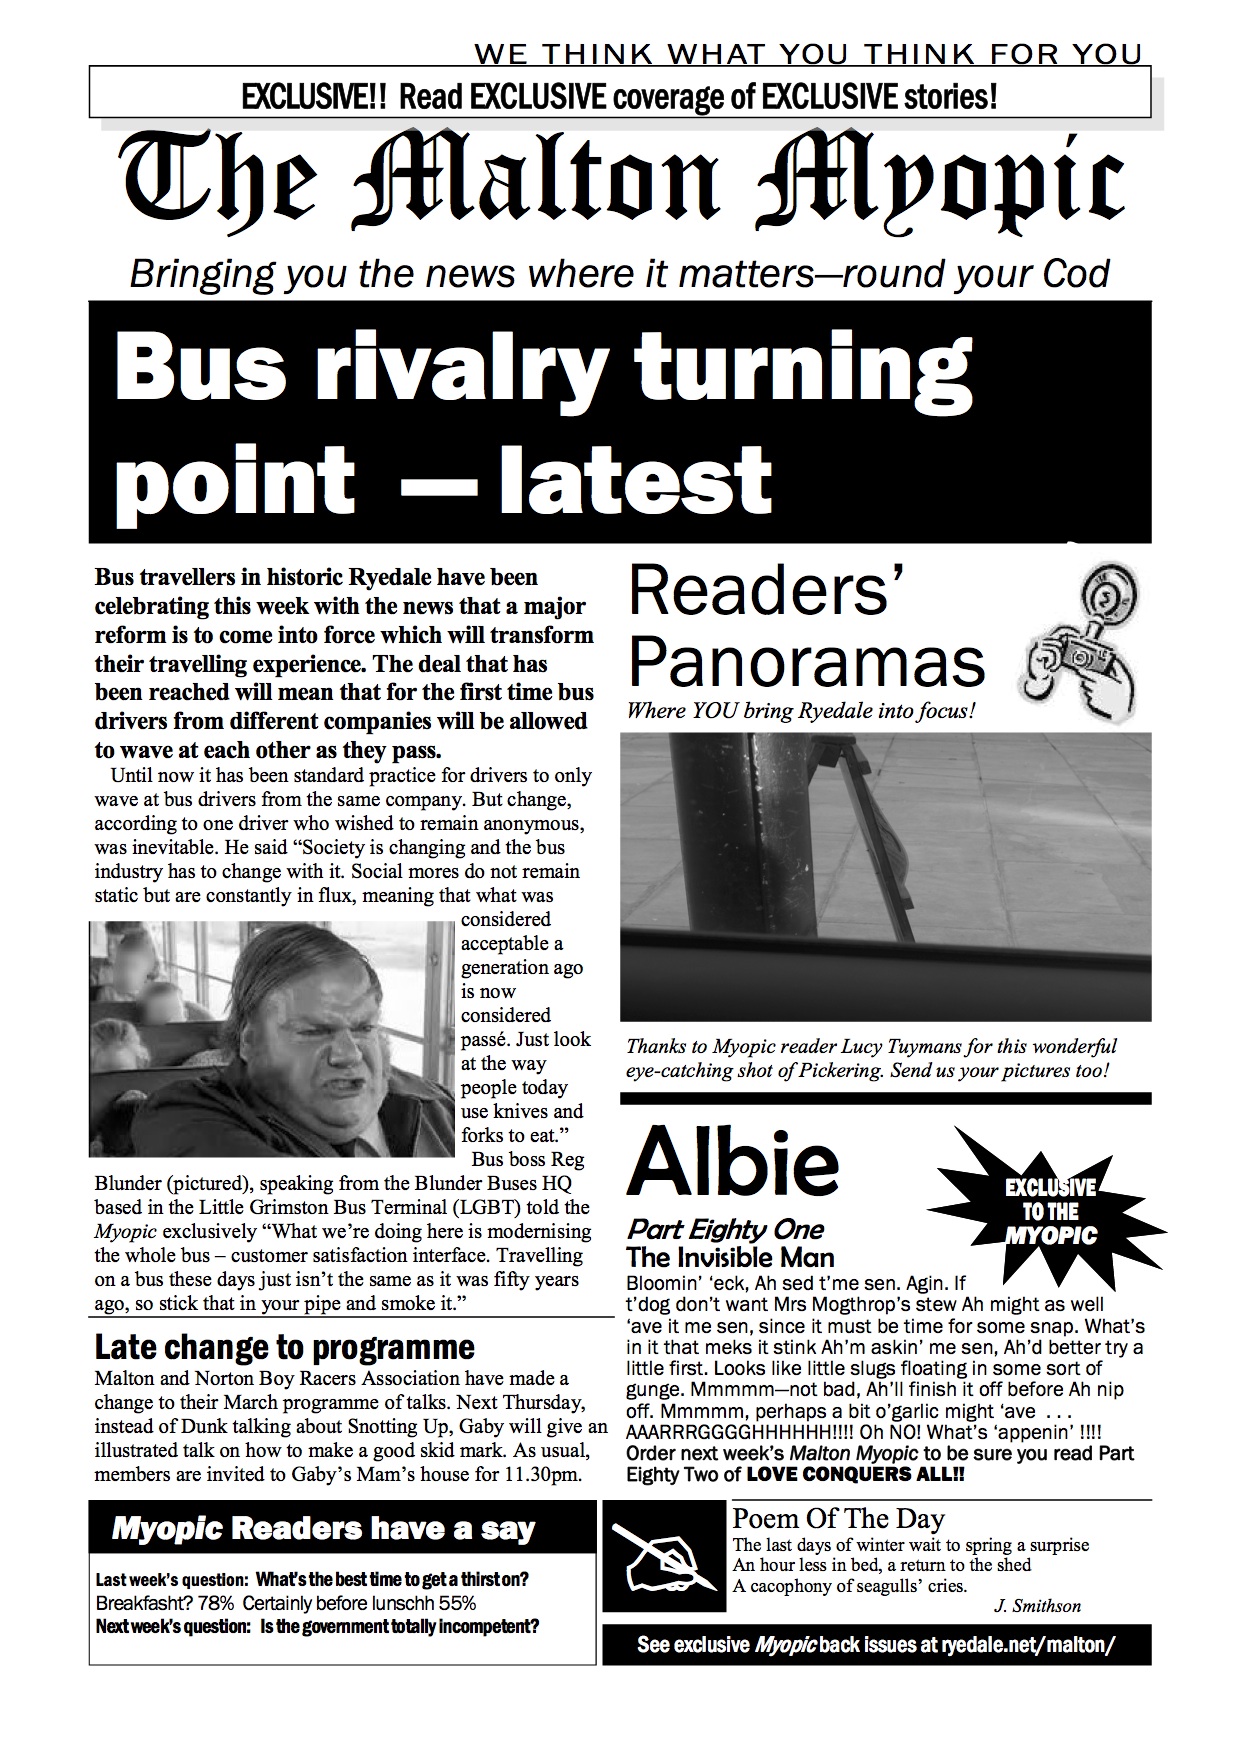 Ryedale bus companies rivalry